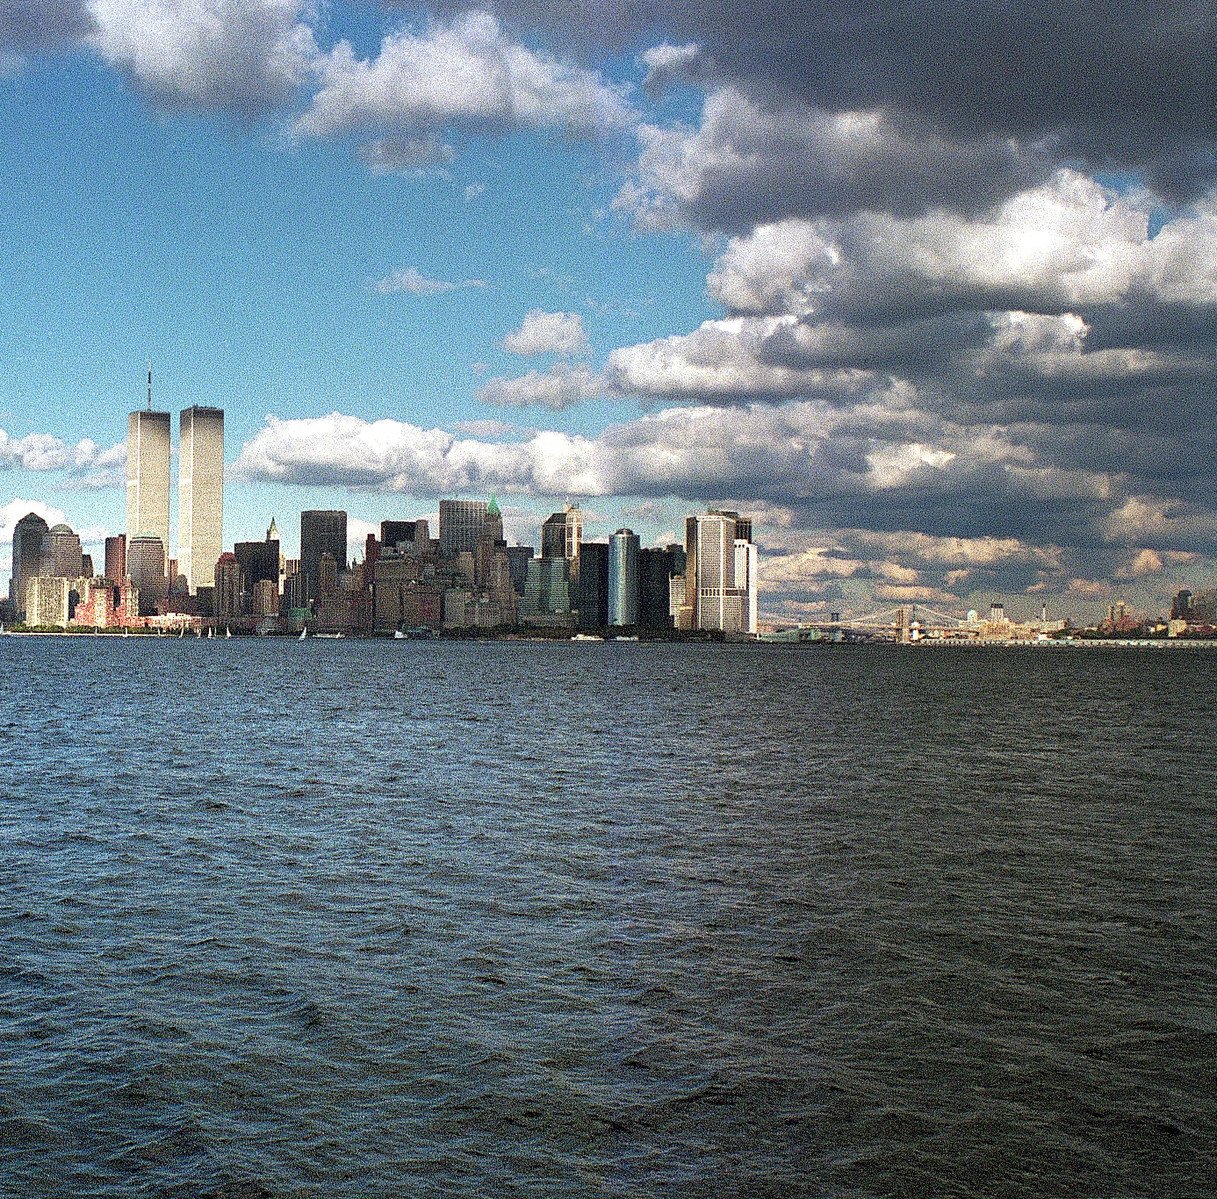 a body of water with some buildings in the background